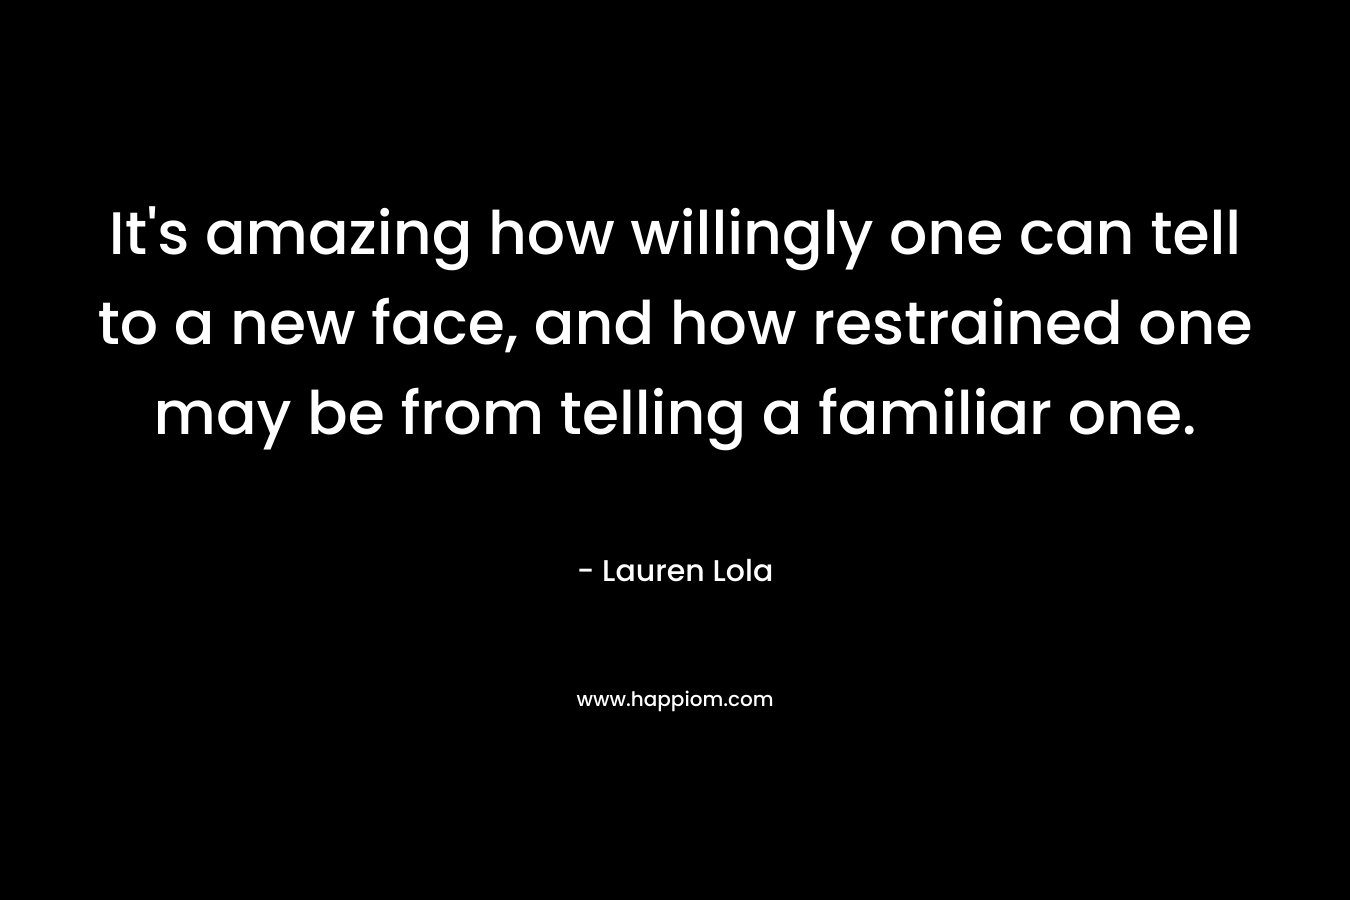 It’s amazing how willingly one can tell to a new face, and how restrained one may be from telling a familiar one. – Lauren Lola